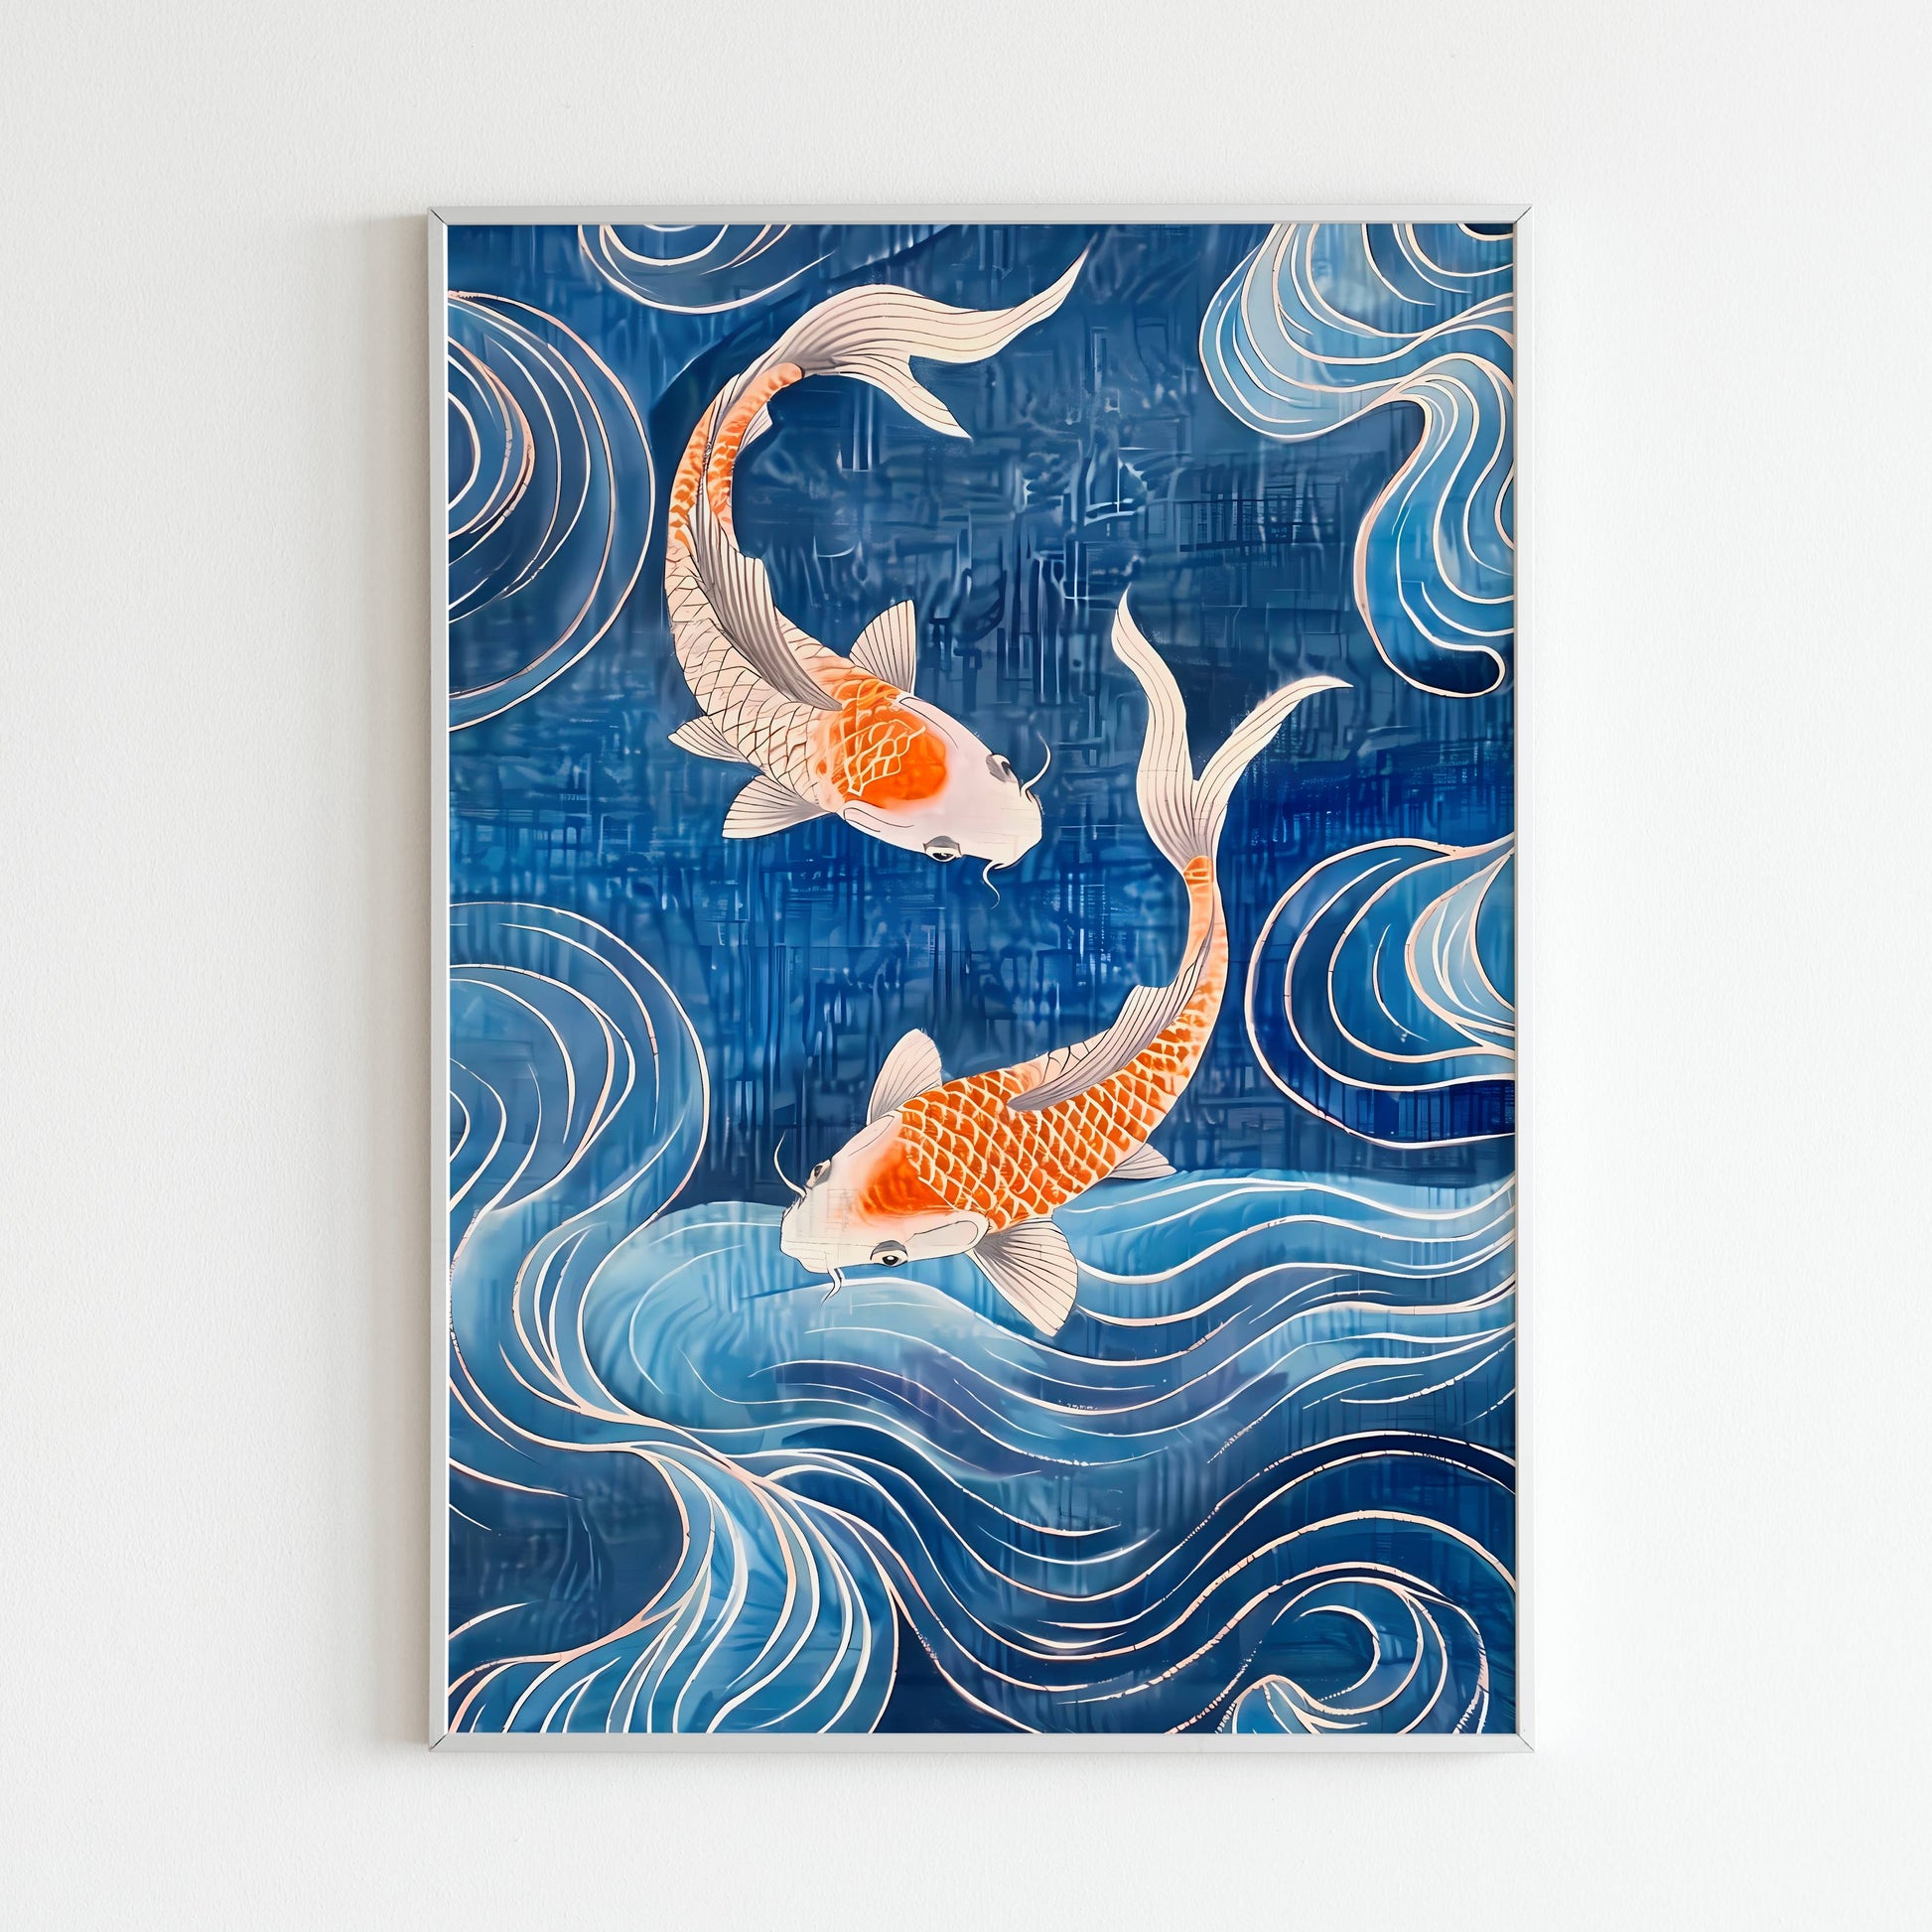 Experience the serenity of koi fish in a graceful dance with this printable poster (physical or digital).